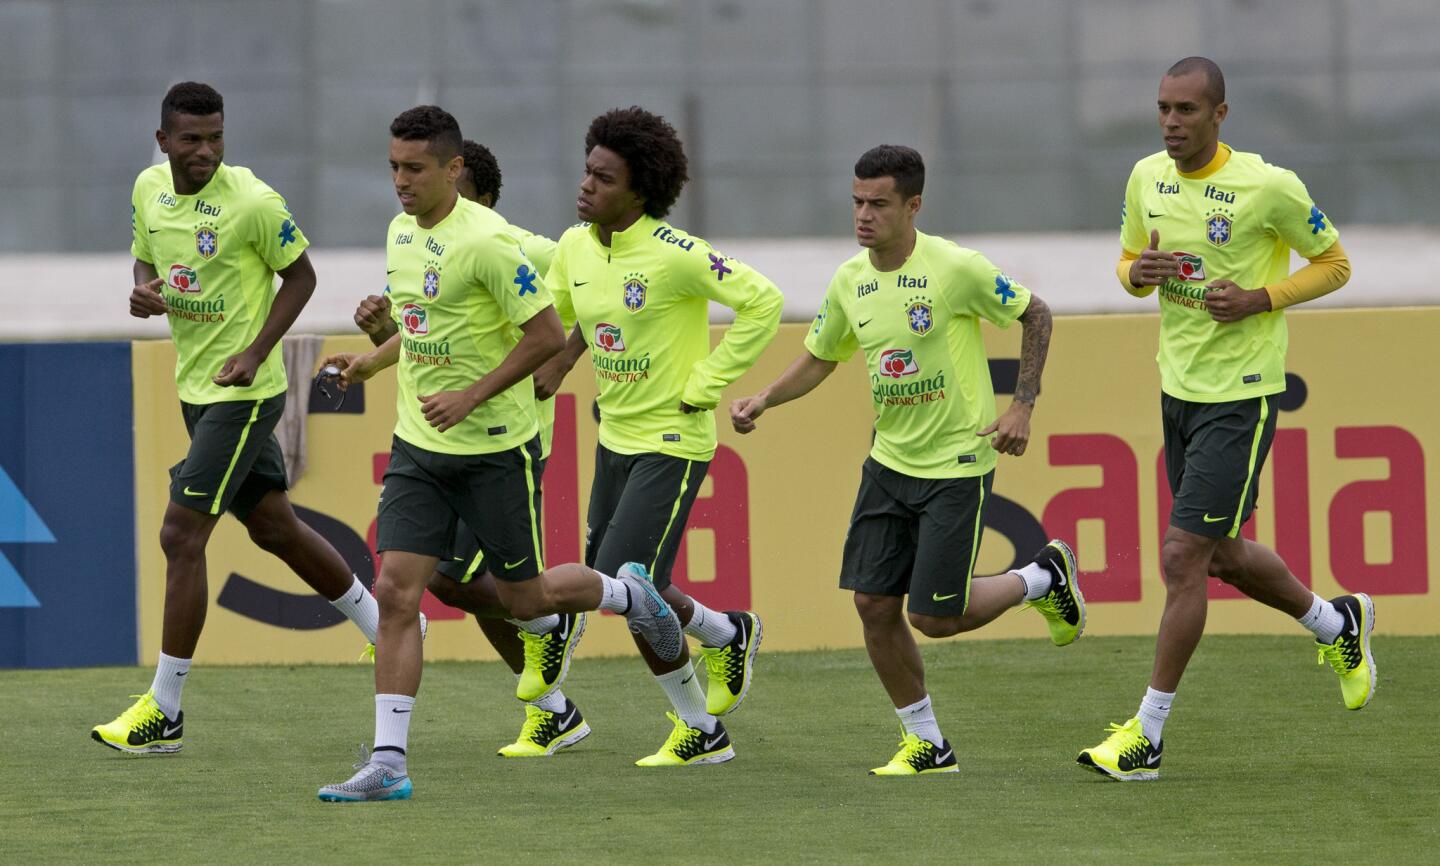 Brazil's soccer players, from left, Geferson, Marquinhos, Willian, Philippe Coutinho, and Miranda train ahead of Copa America 2015, in Teresopolis, Brazil, Tuesday, June 2, 2015.